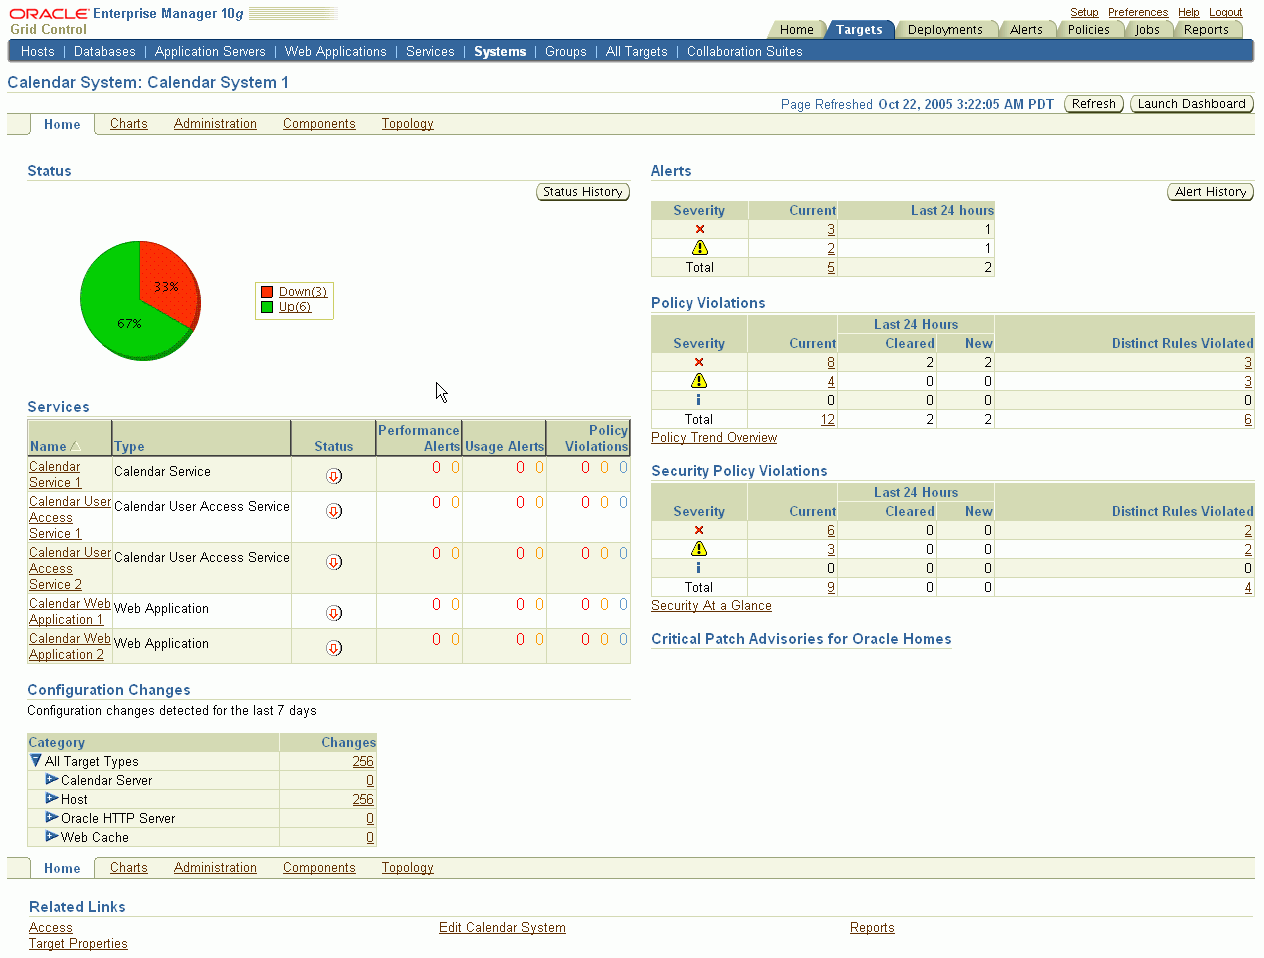 This figure shows a screenshot of the Enterprise Manager System Home page